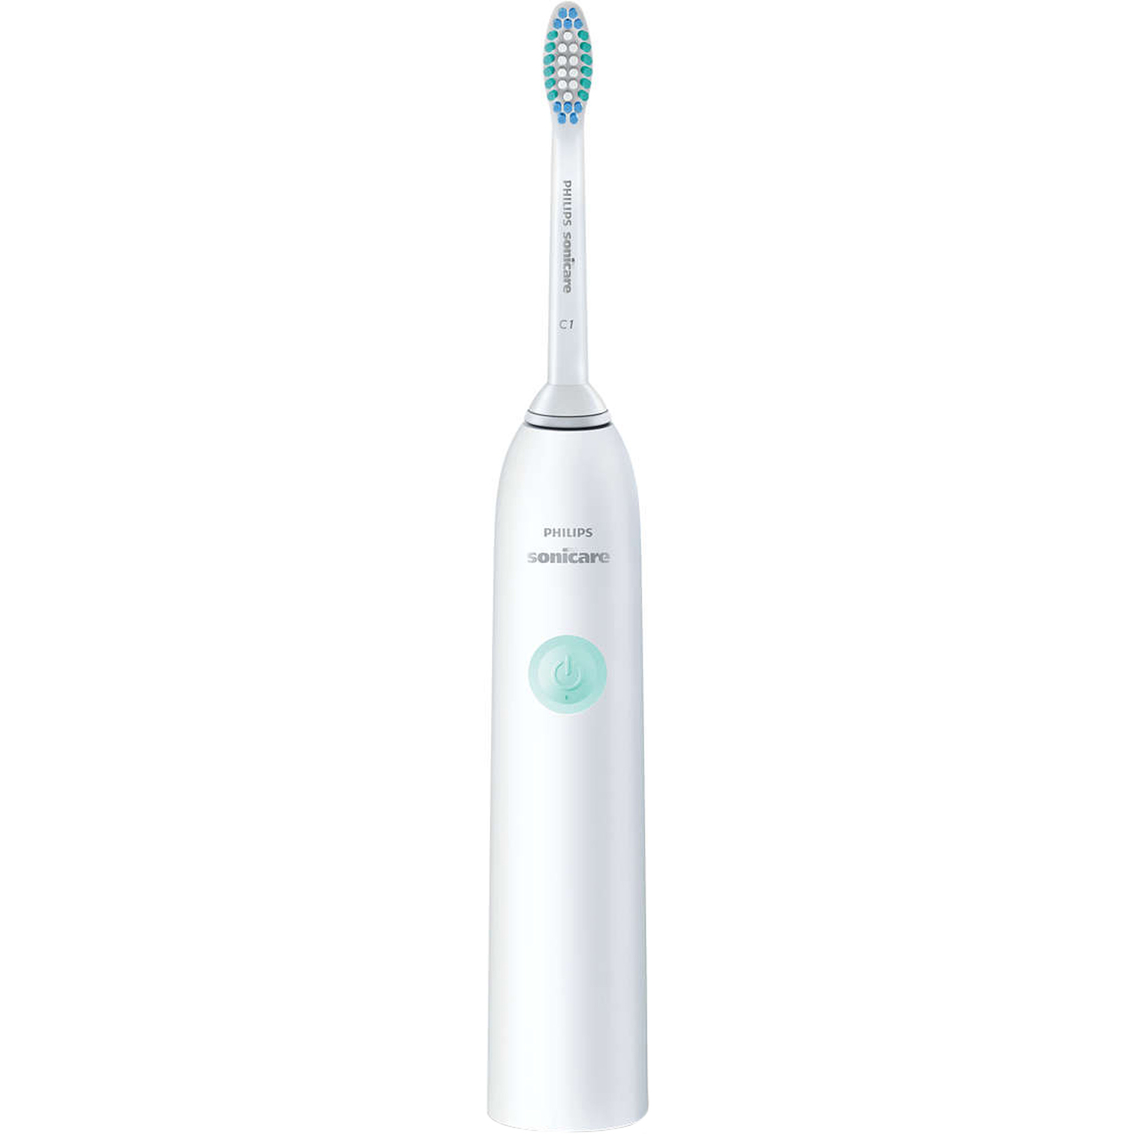 Philips Sonicare DailyClean 1100 Sonic Electric Toothbrush - Image 2 of 2